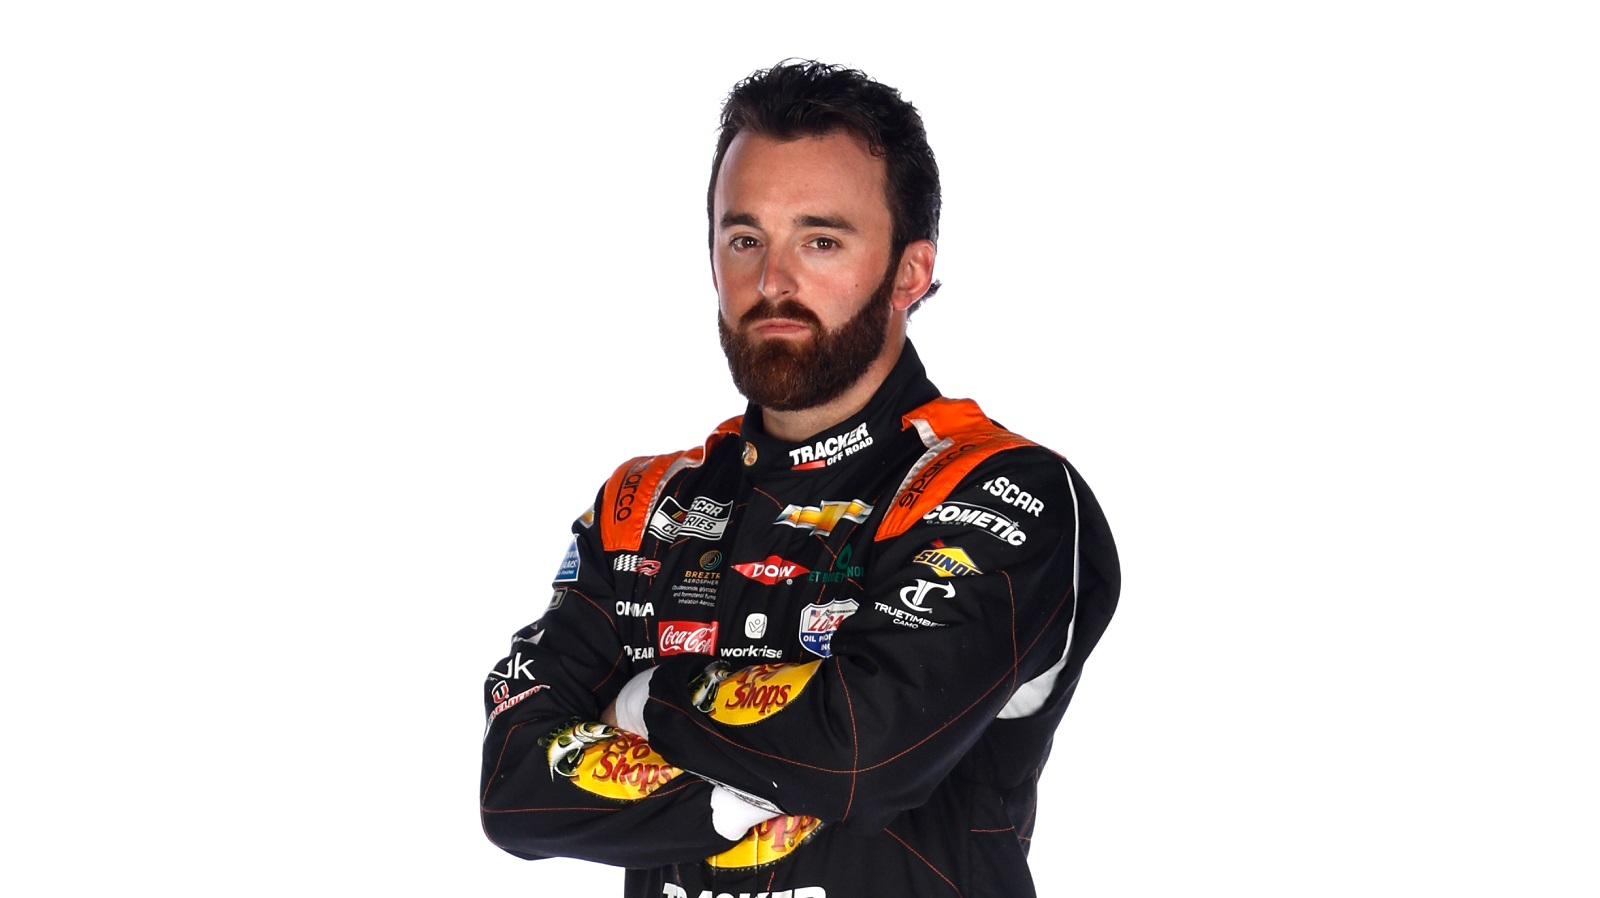 Austin Dillon poses for a photo during NASCAR Production Days at Clutch Studios on Jan. 19, 2022 in Concord, North Carolina.